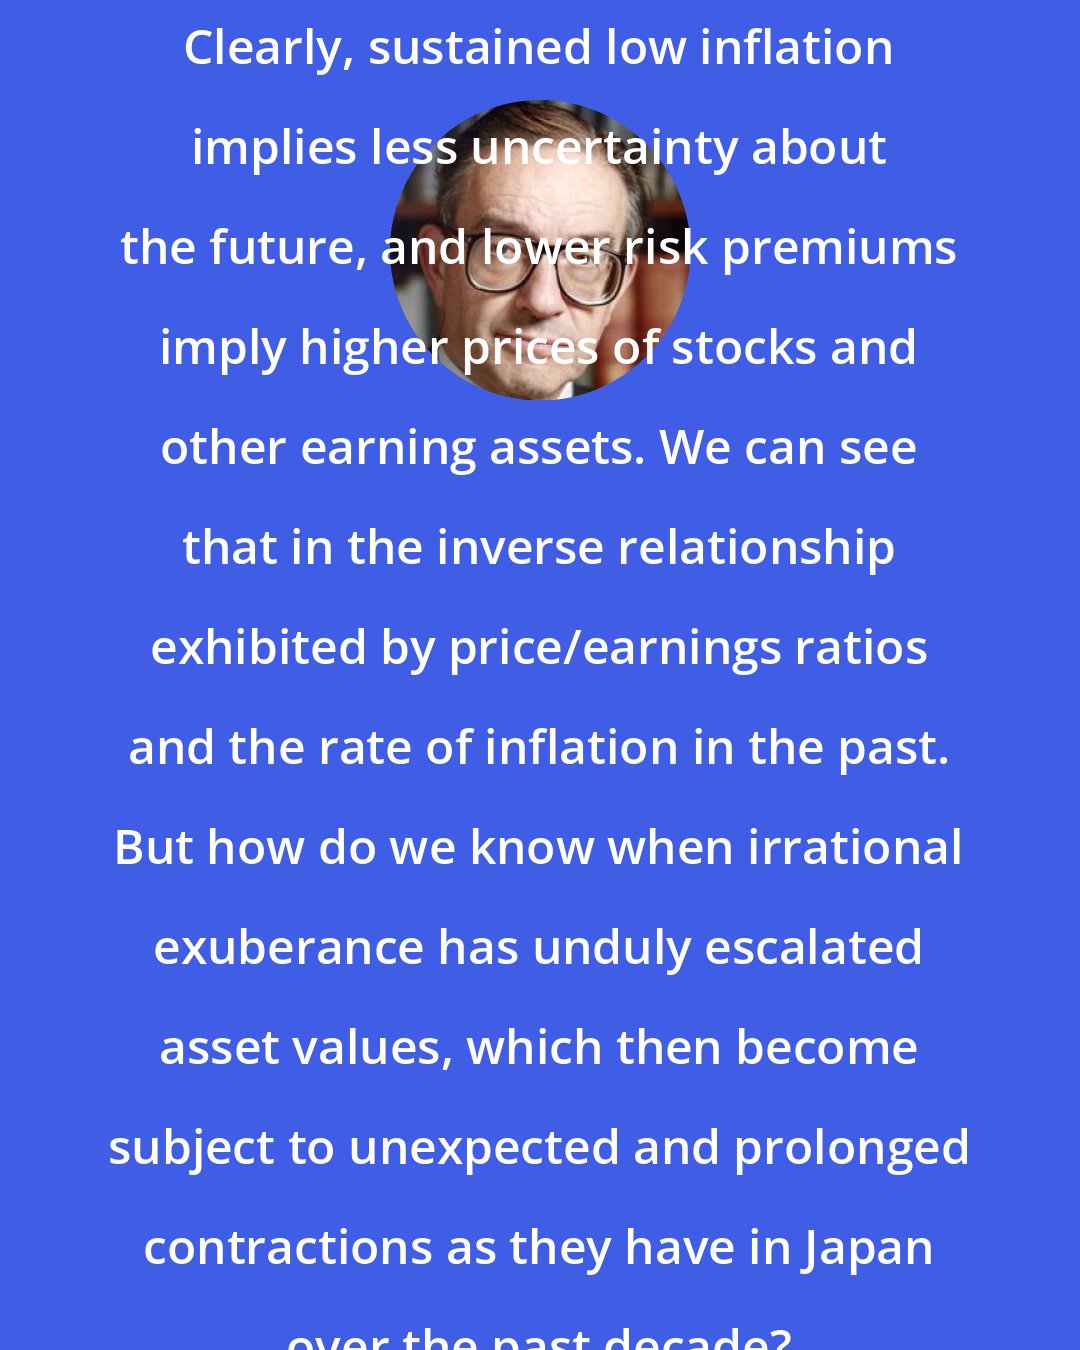 Alan Greenspan: Clearly, sustained low inflation implies less uncertainty about the future, and lower risk premiums imply higher prices of stocks and other earning assets. We can see that in the inverse relationship exhibited by price/earnings ratios and the rate of inflation in the past. But how do we know when irrational exuberance has unduly escalated asset values, which then become subject to unexpected and prolonged contractions as they have in Japan over the past decade?